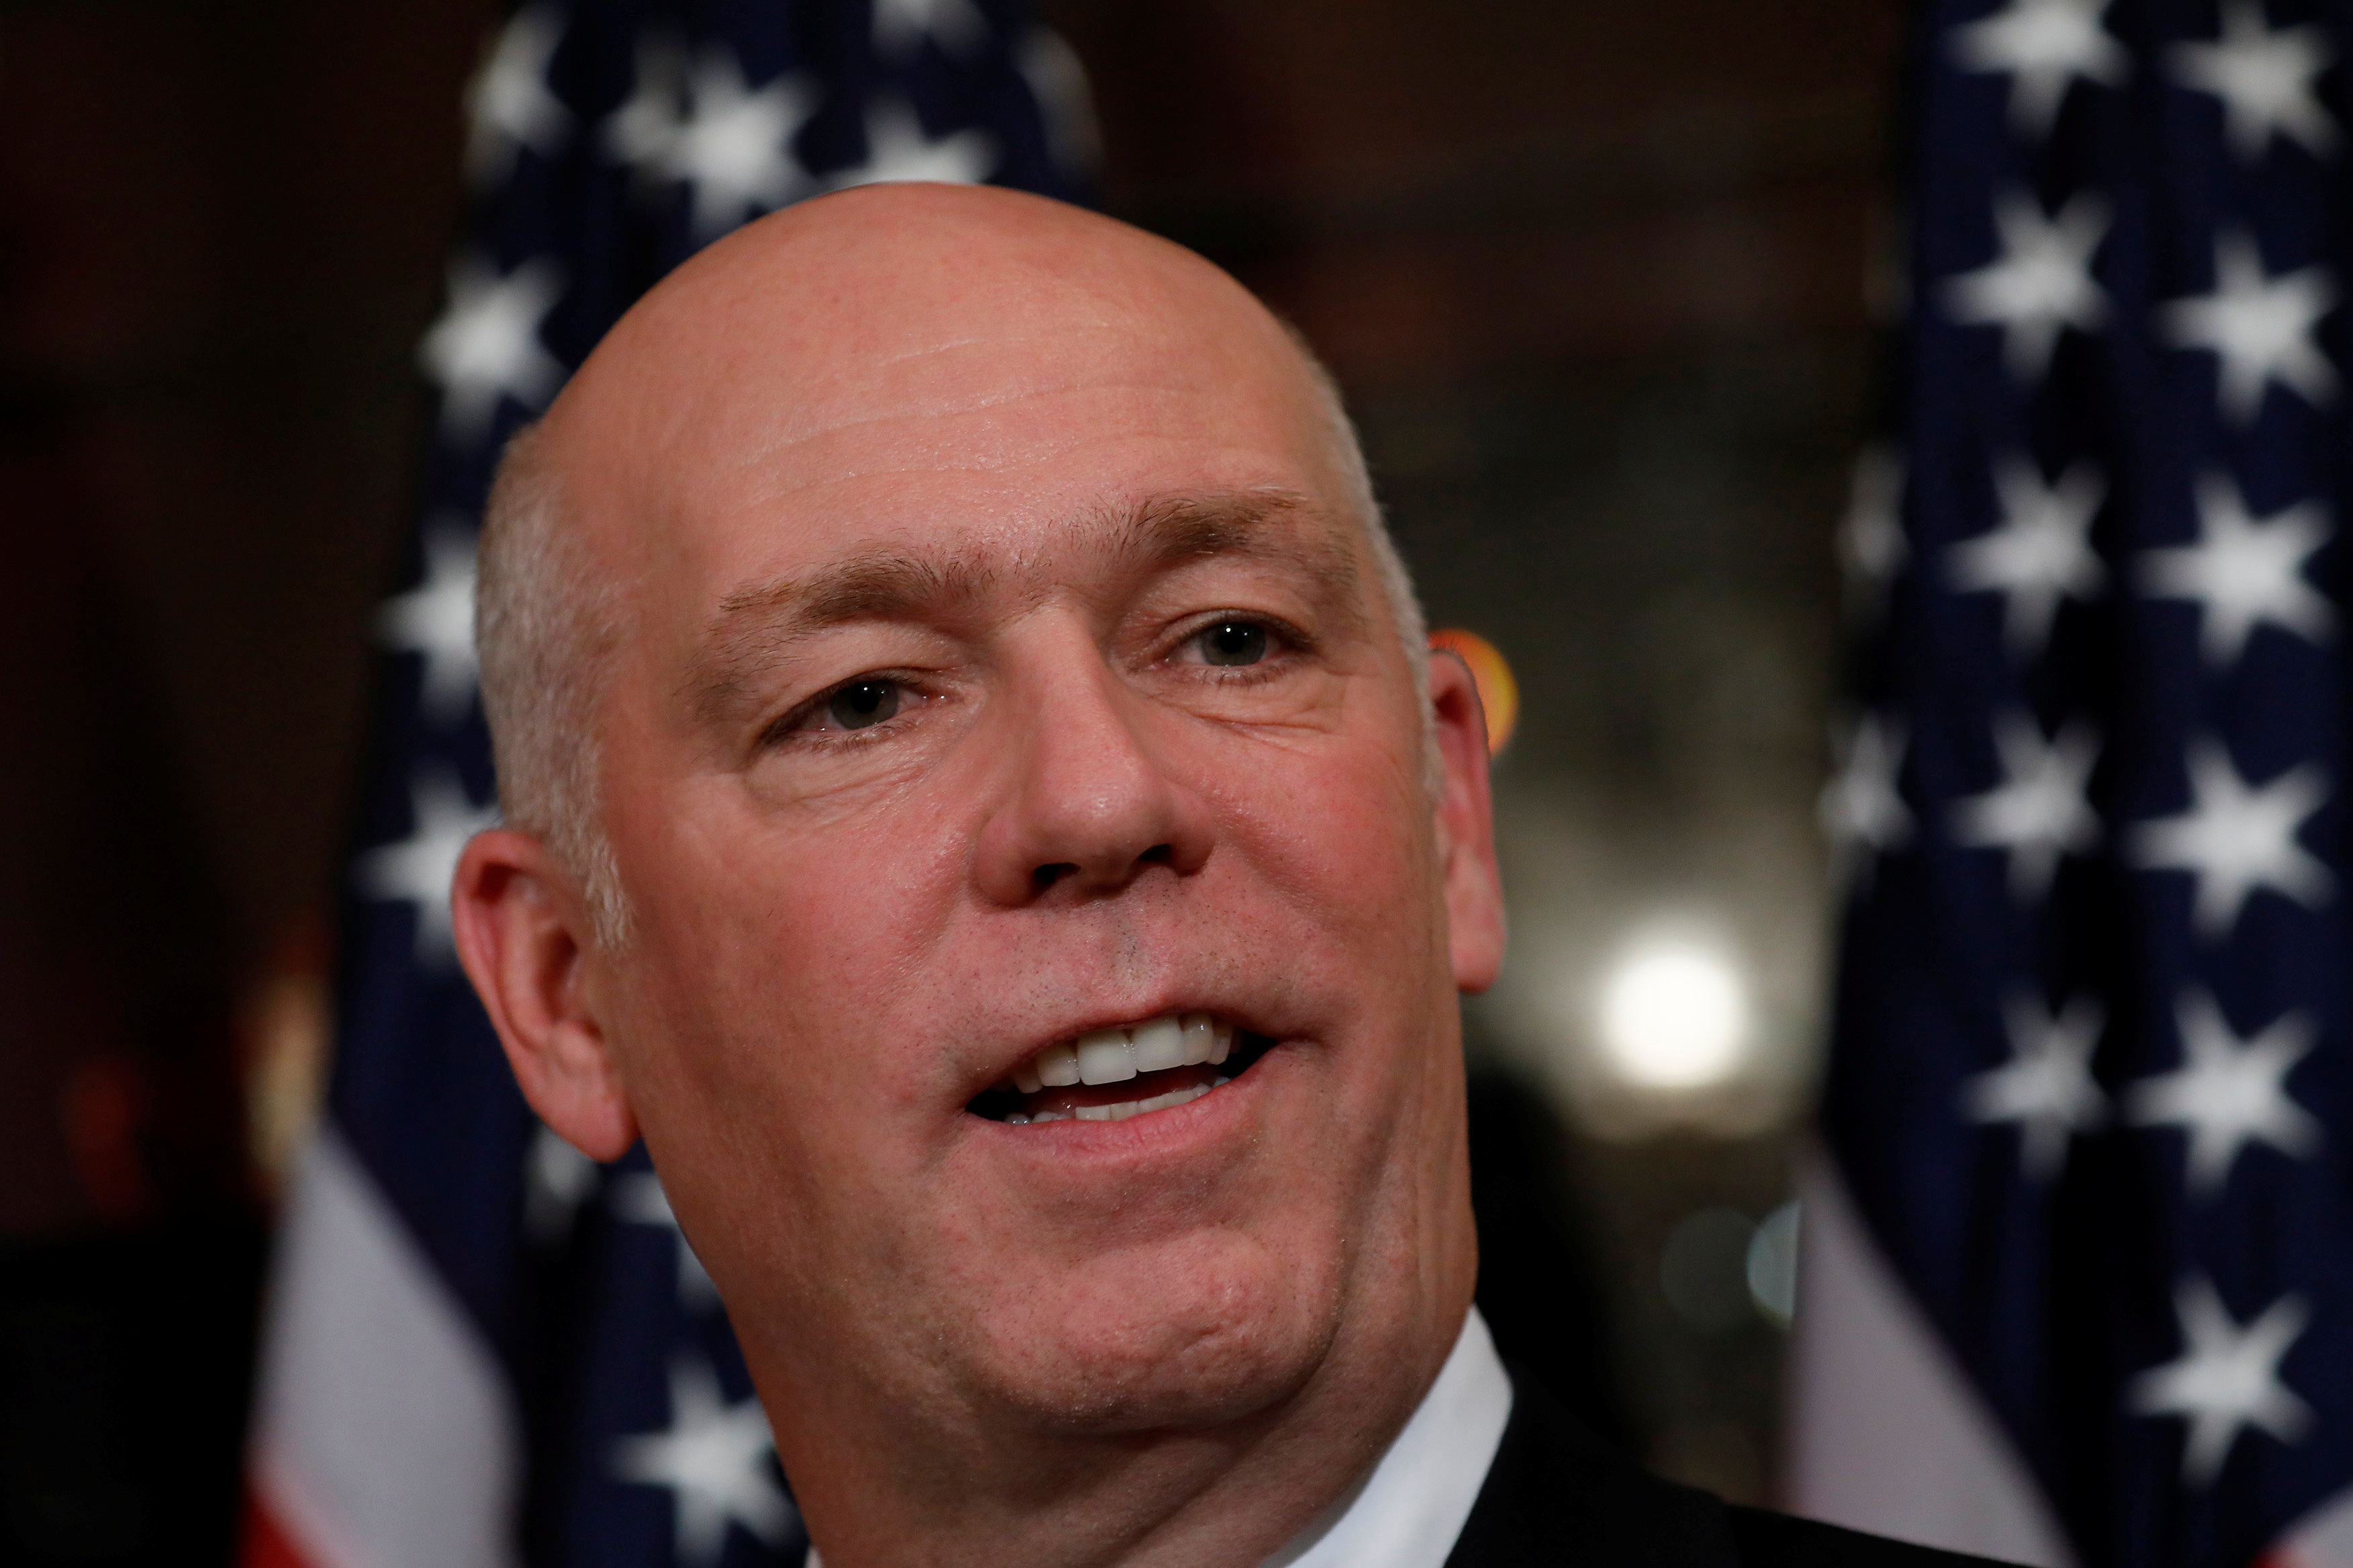 Rep. Greg Gianforte (R-MT) speaks with reporters prior to a ceremonial swearing-in ceremony at the U.S. Capitol Building in Washington